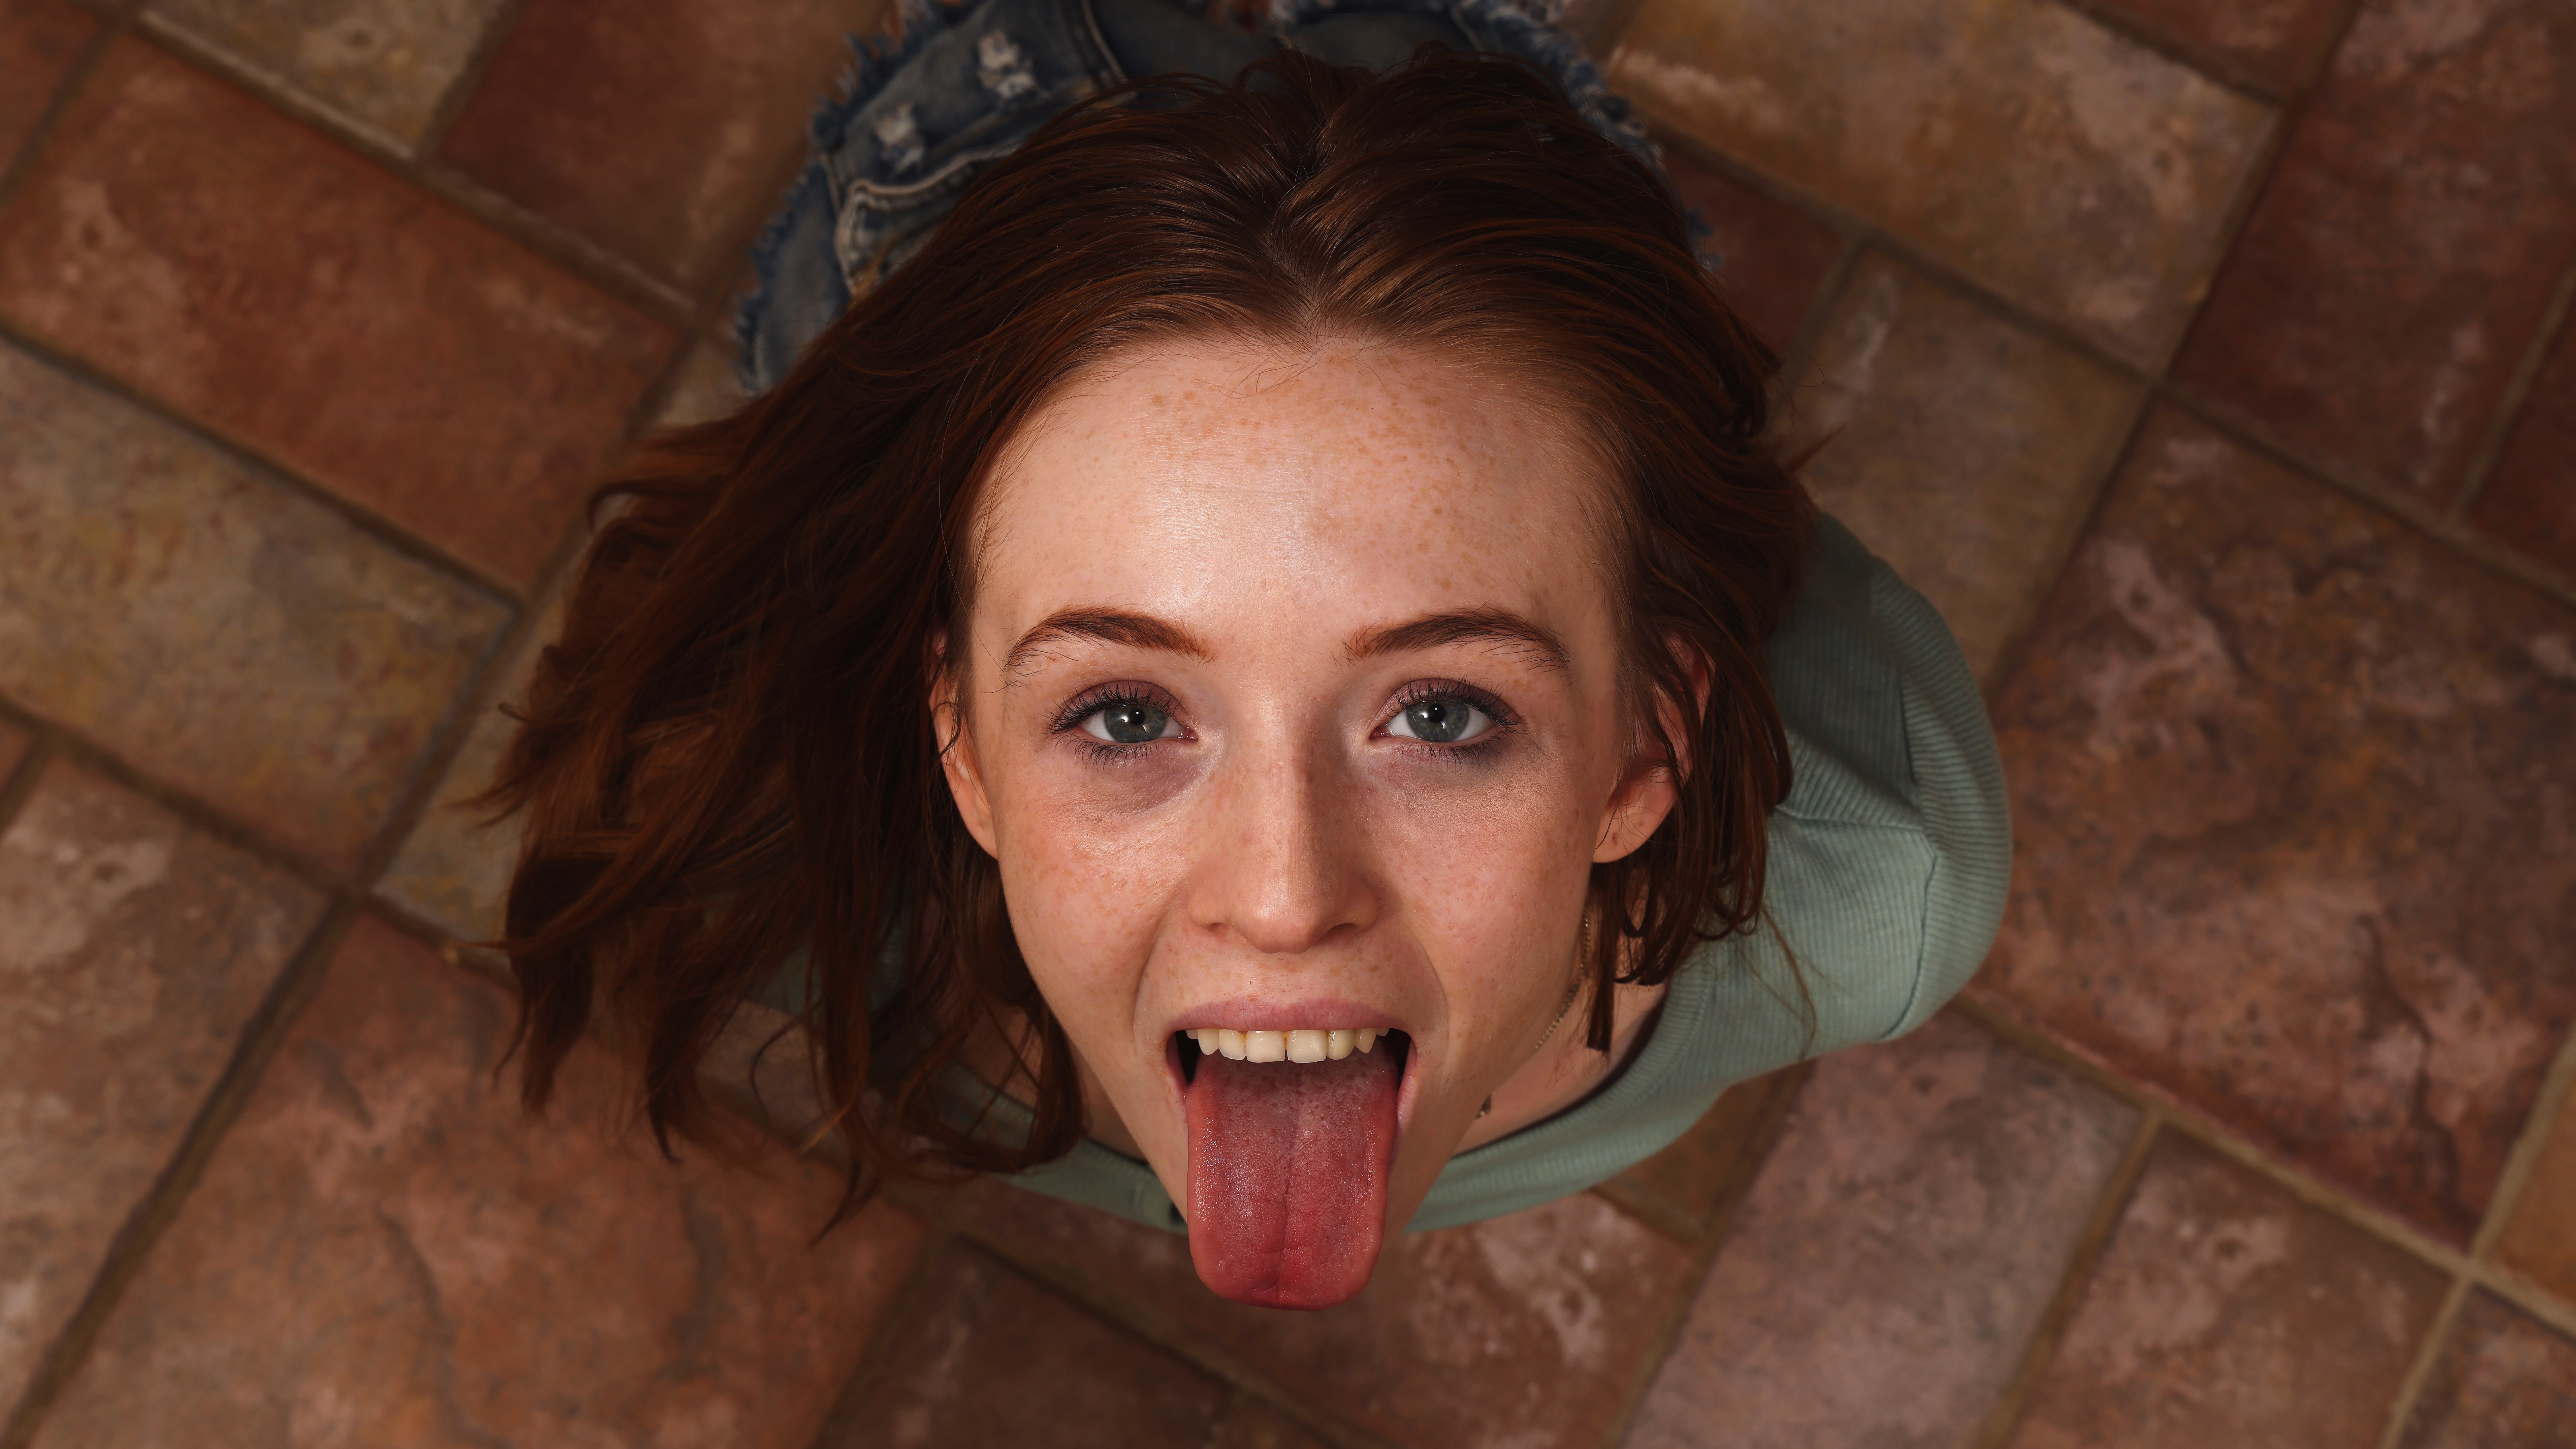 People 7647x4301 Madi Collins tongue out redhead green eyes women pornstar suggestive closeup open mouth freckles